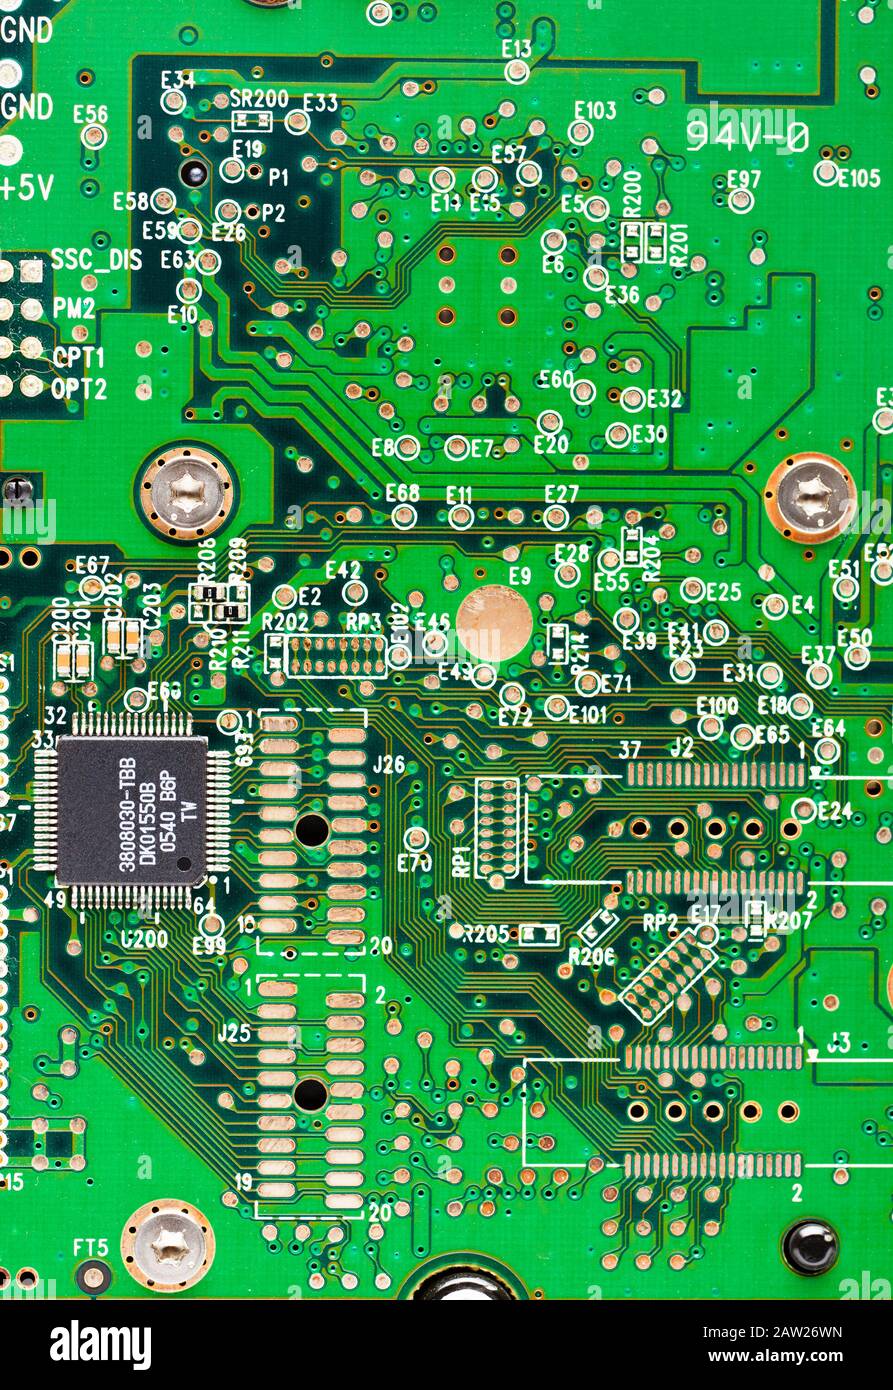 Technology, printed circuit board, (PCB) and computer chips Stock Photo